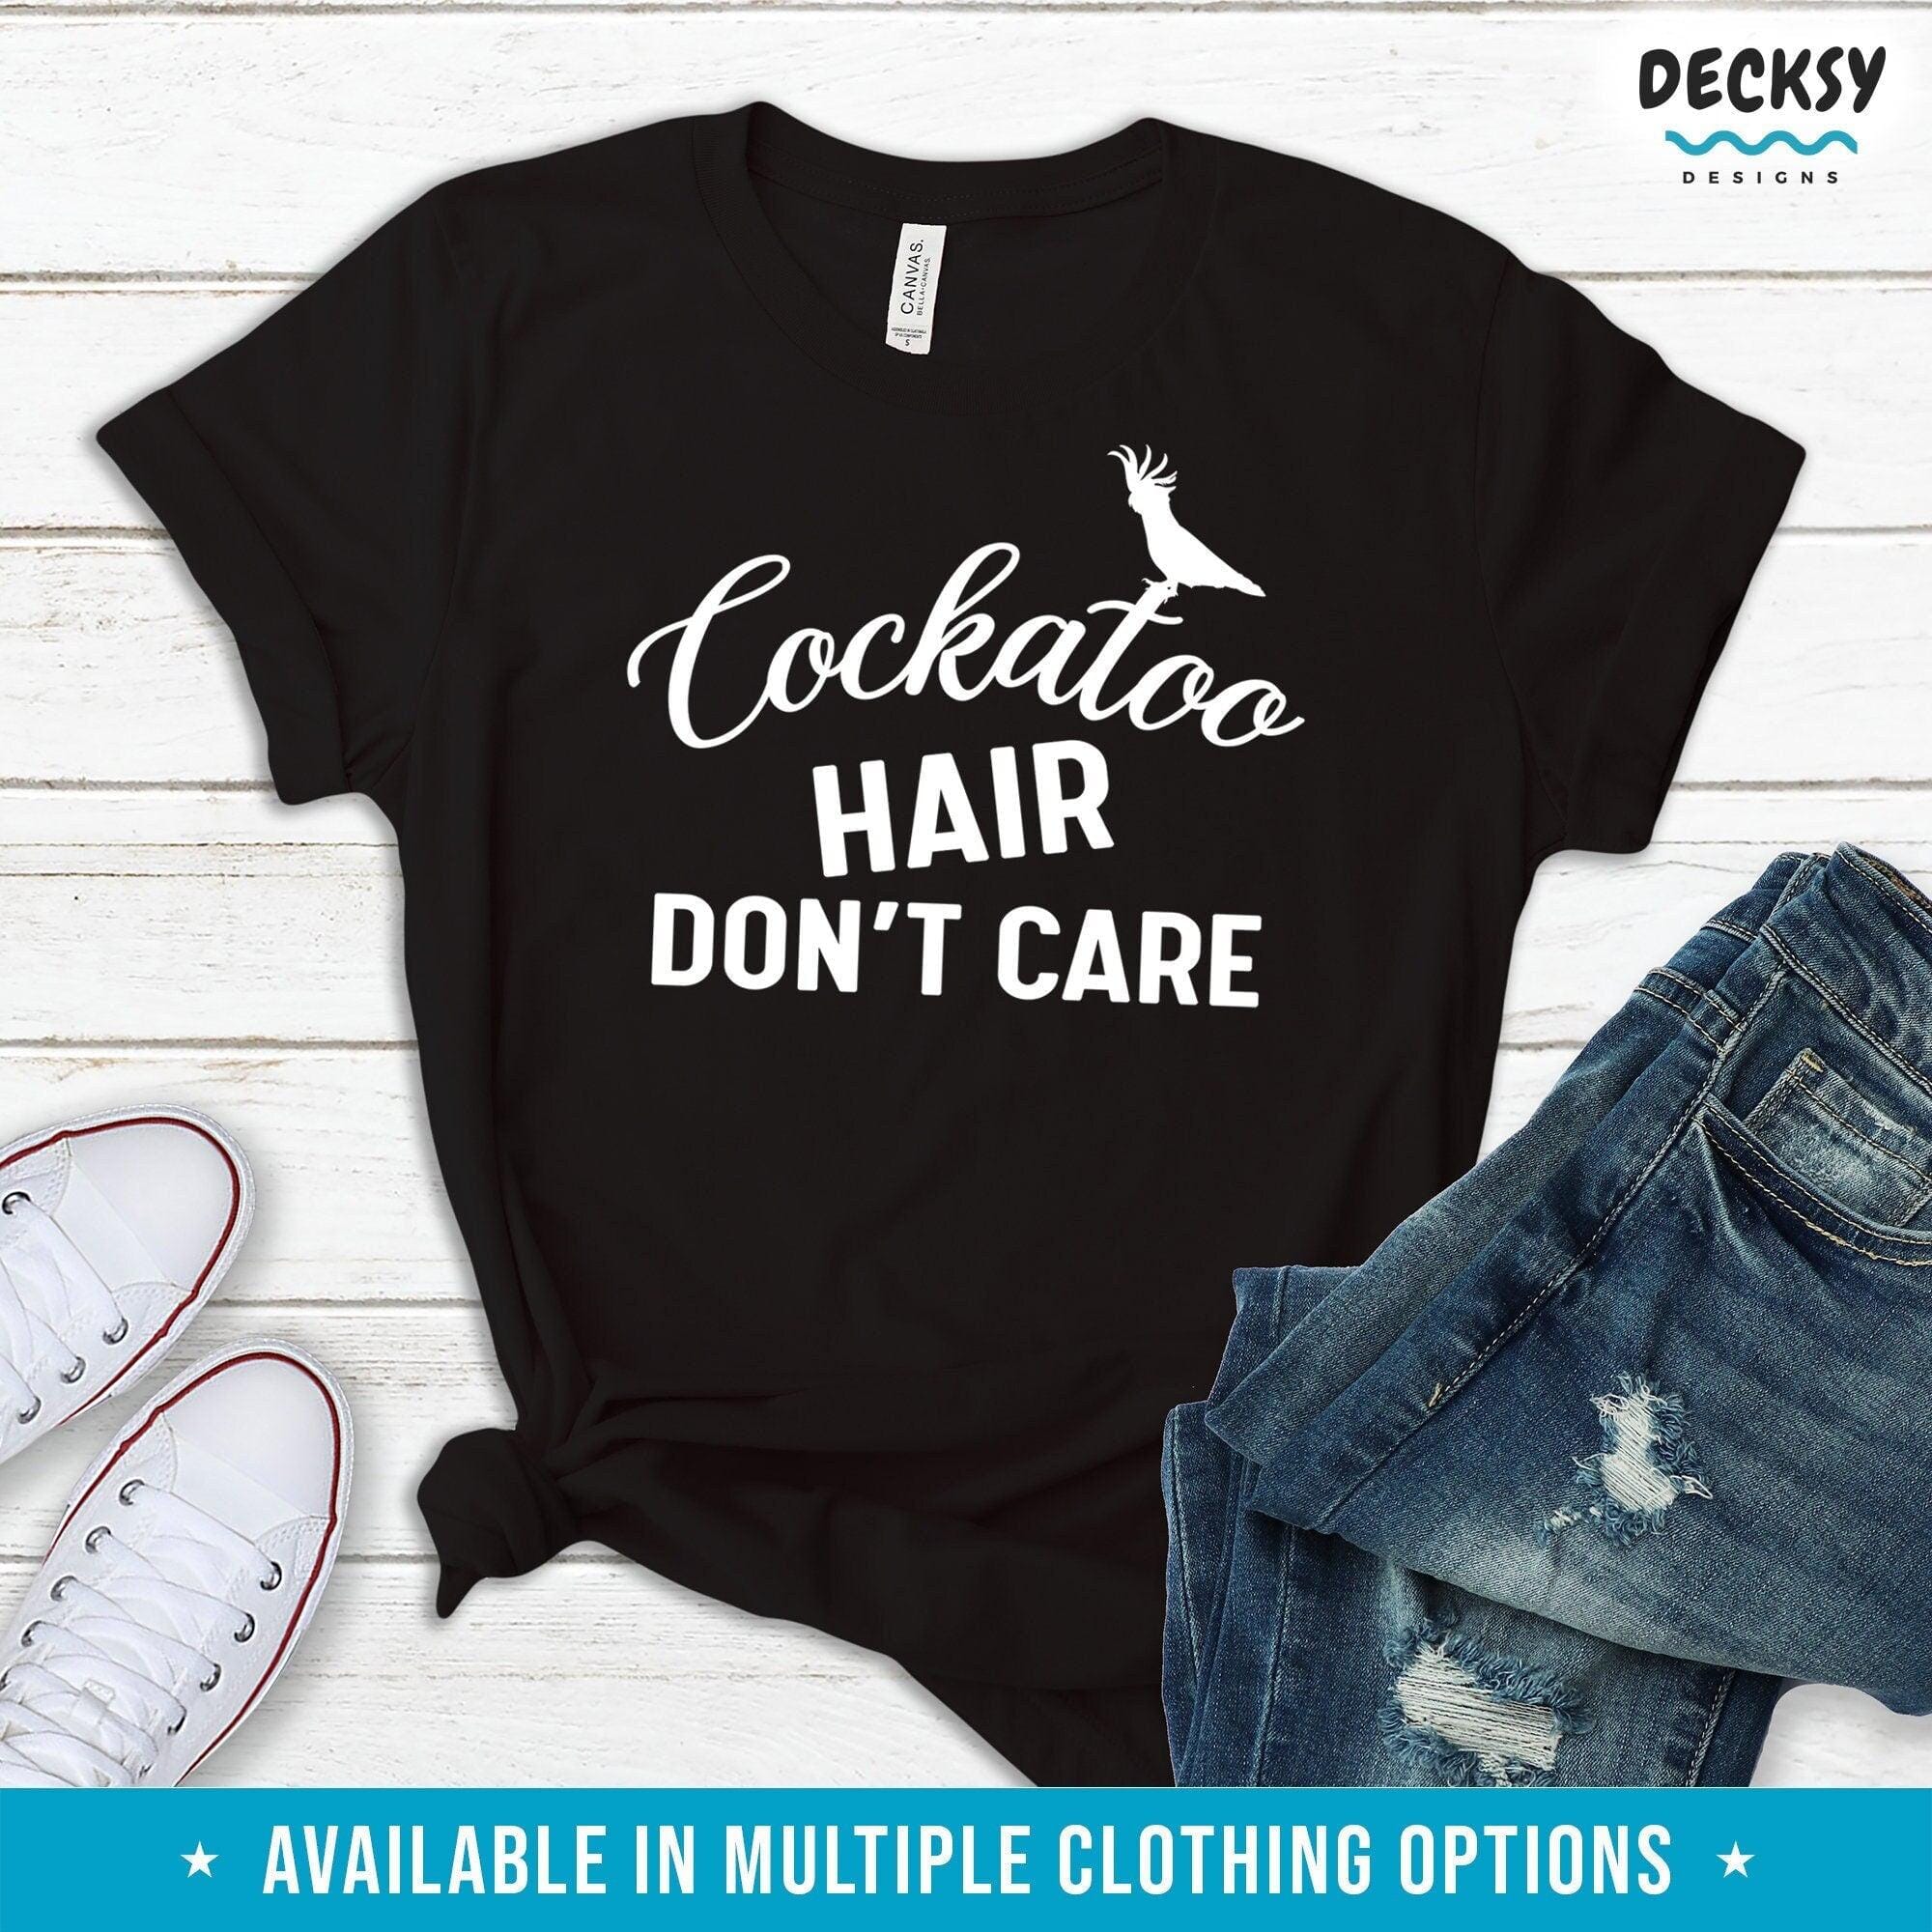 Cockatoo Shirt, Gift for Cockatoo Owner, Funny Bird Lover Sweatshirt Hoodie-Clothing:Gender-Neutral Adult Clothing:Tops & Tees:T-shirts:Graphic Tees-DecksyDesigns